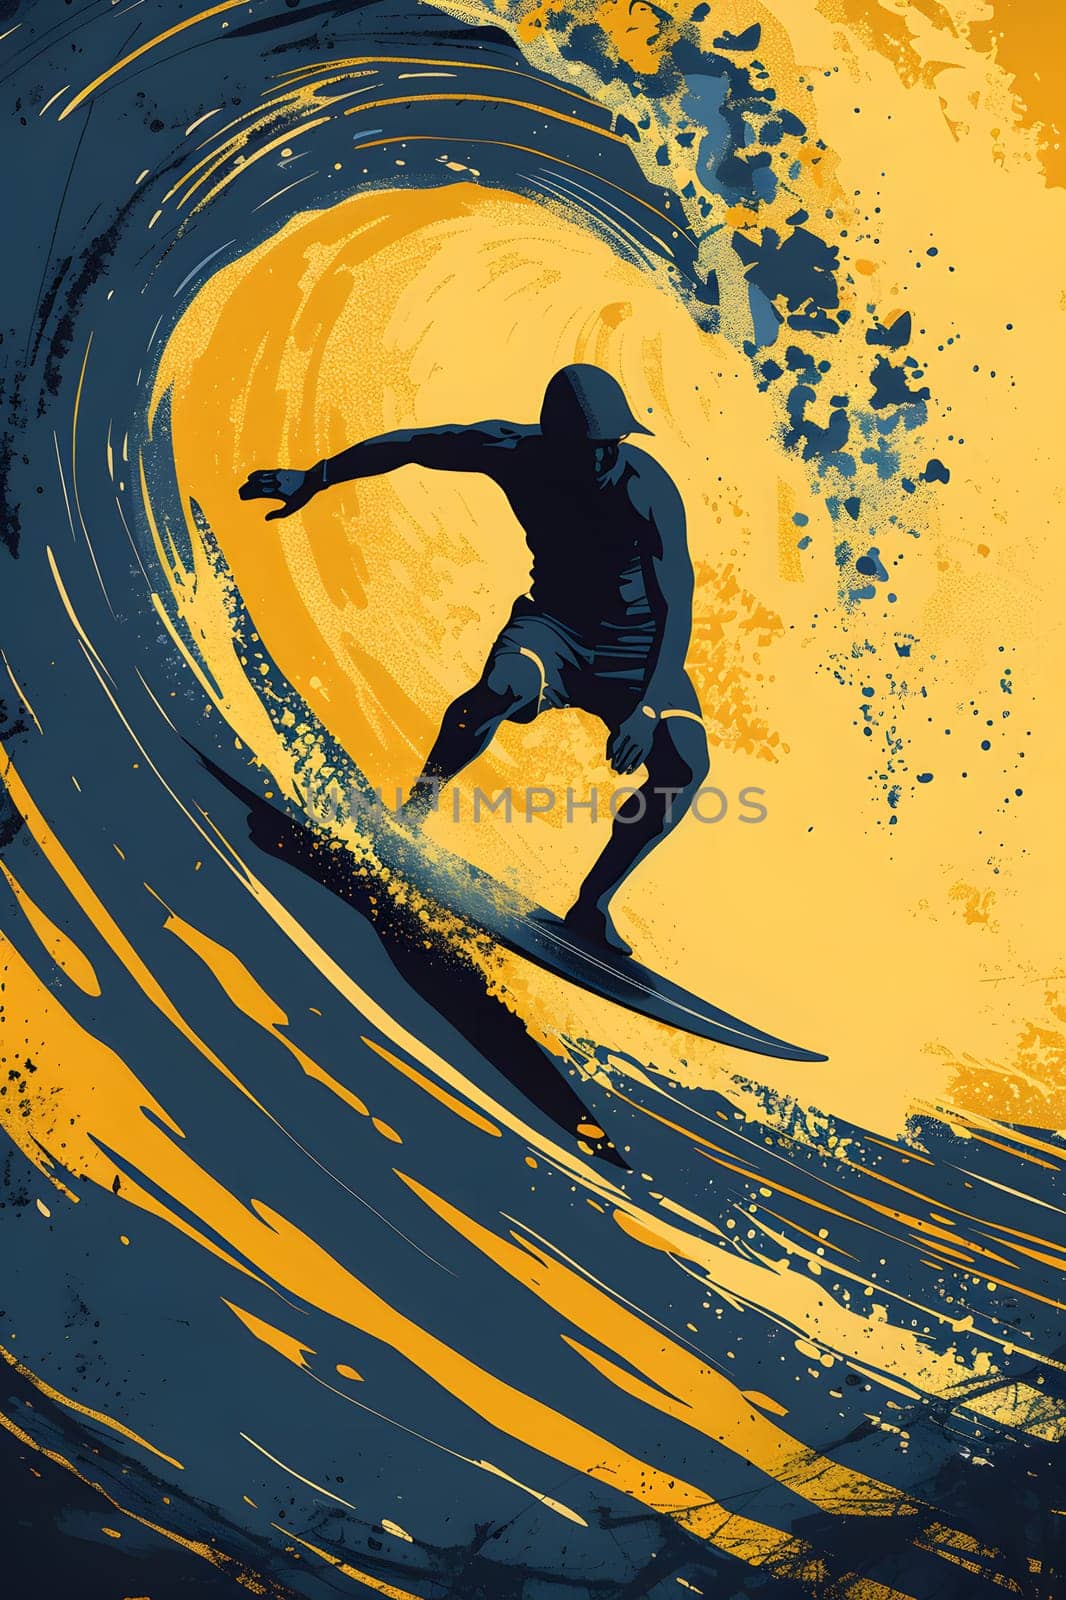 A man is surfing on a wind wave, surrounded by electric blue waters. The recreation of riding a wave on a surfboard is like a painting in the landscape of extreme sports